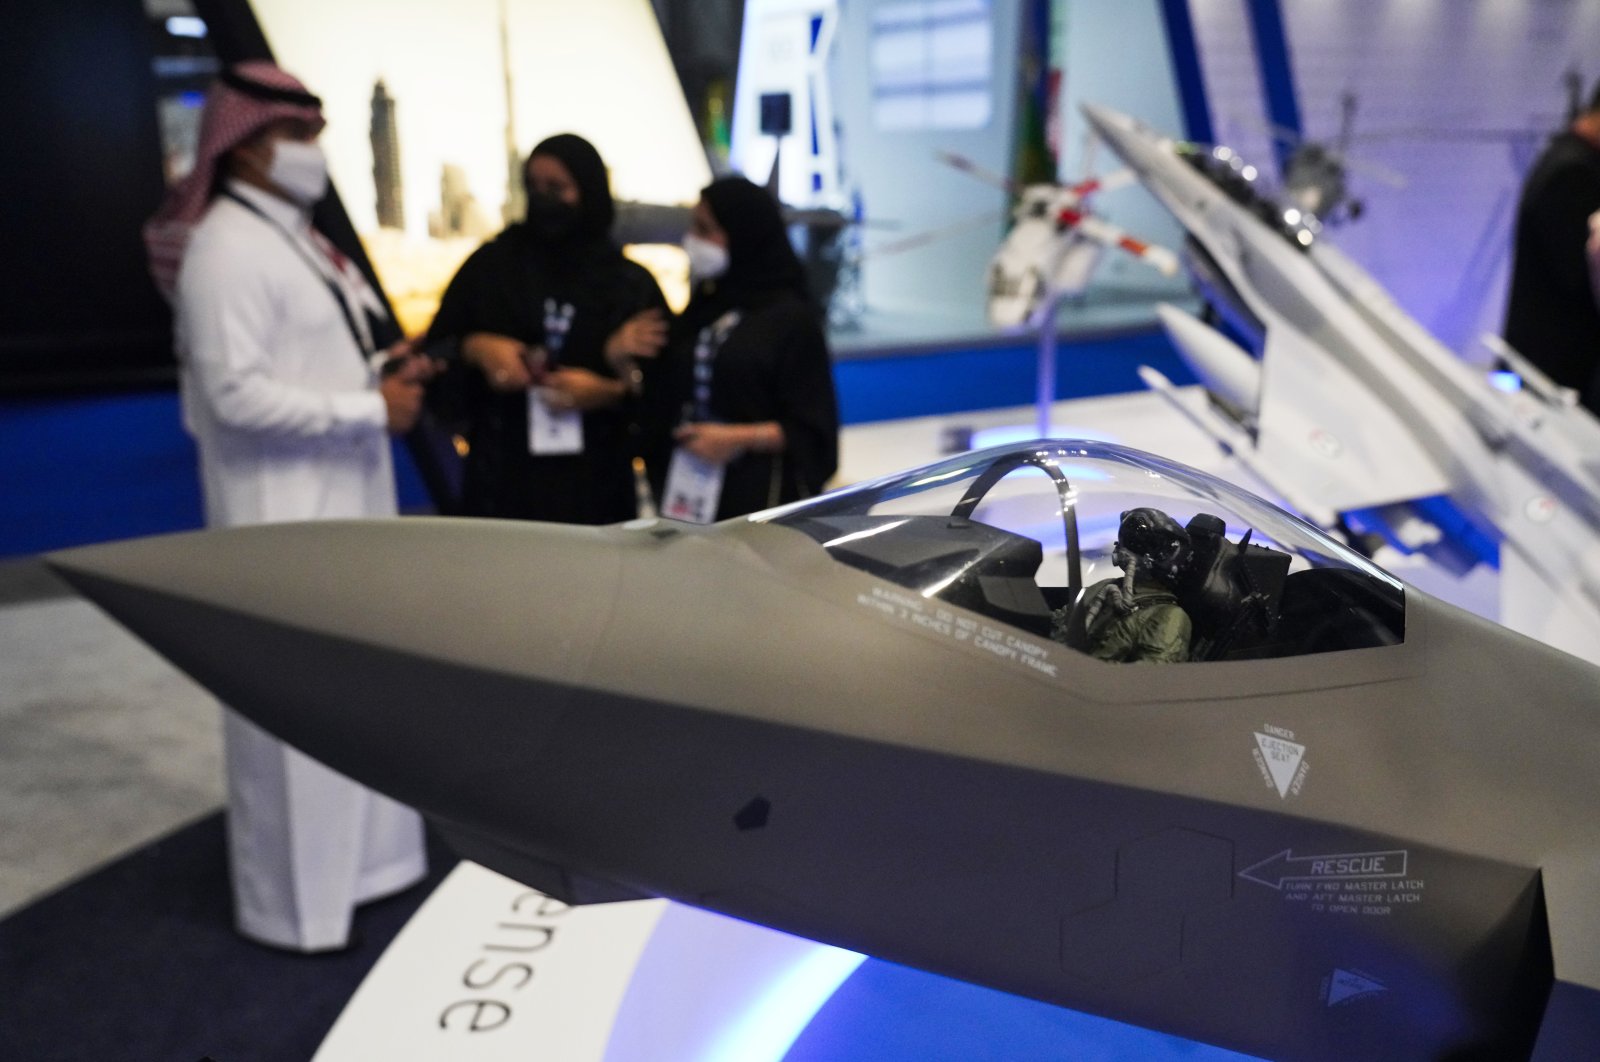 A model F-35 stealth fighter jet is on display at the Lockheed Martin stand at the Dubai Air Show in Dubai, United Arab Emirates, Tuesday, Nov. 16, 2021. (AP Photo)